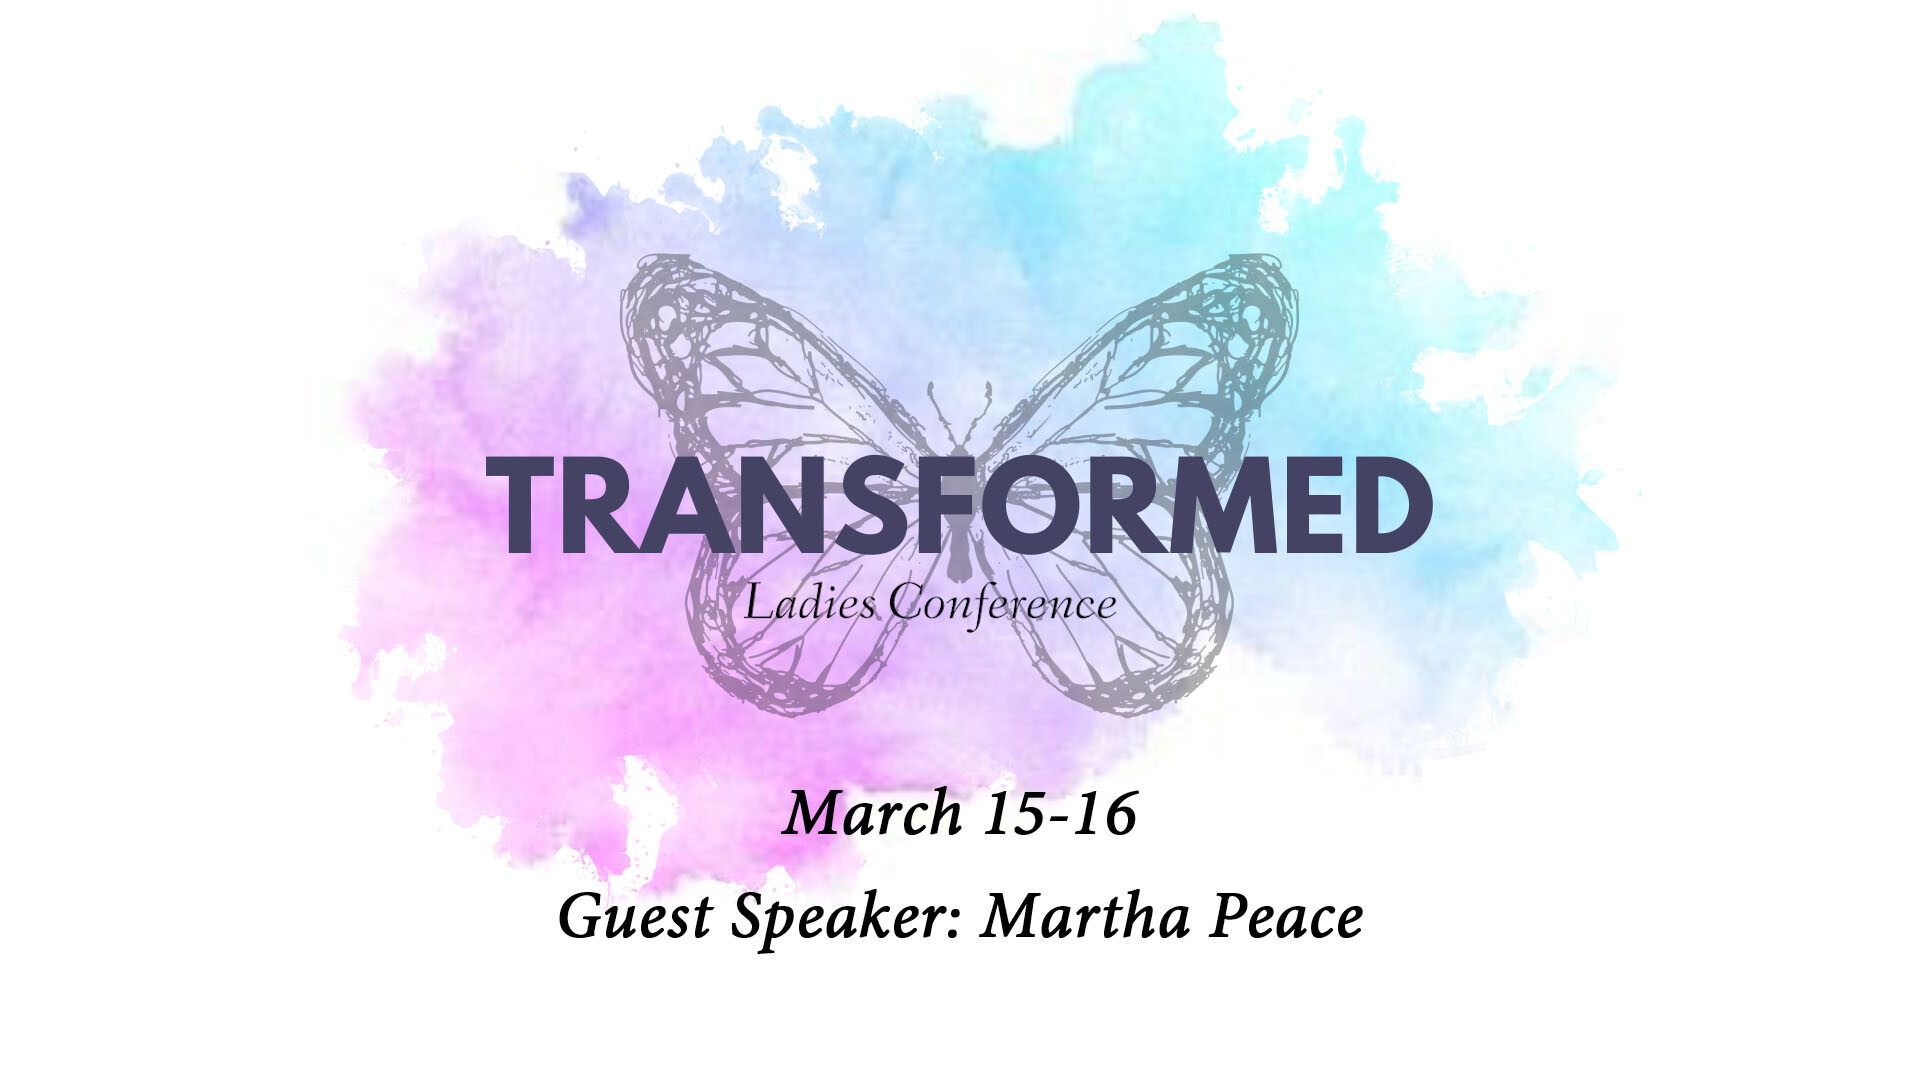 Session 3: Transformed Women's Conference